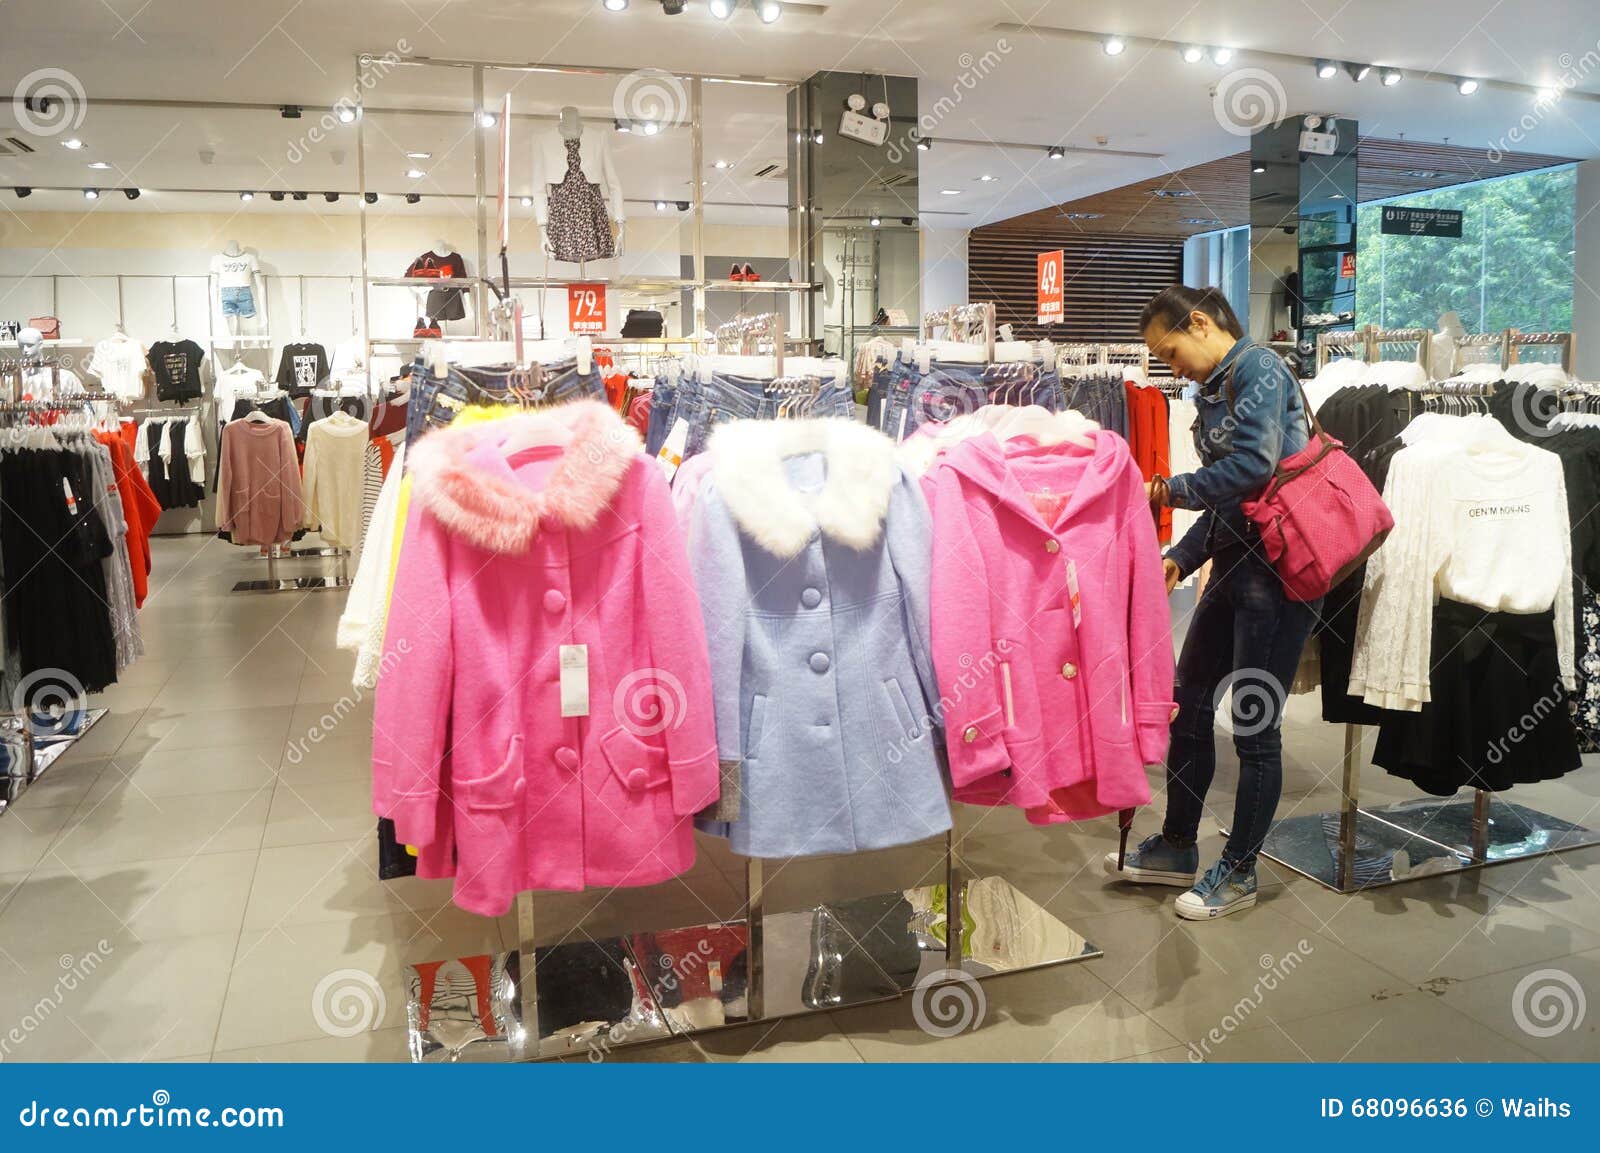 Spring Clothing Store Interior Landscape Editorial Photo - Image of ...